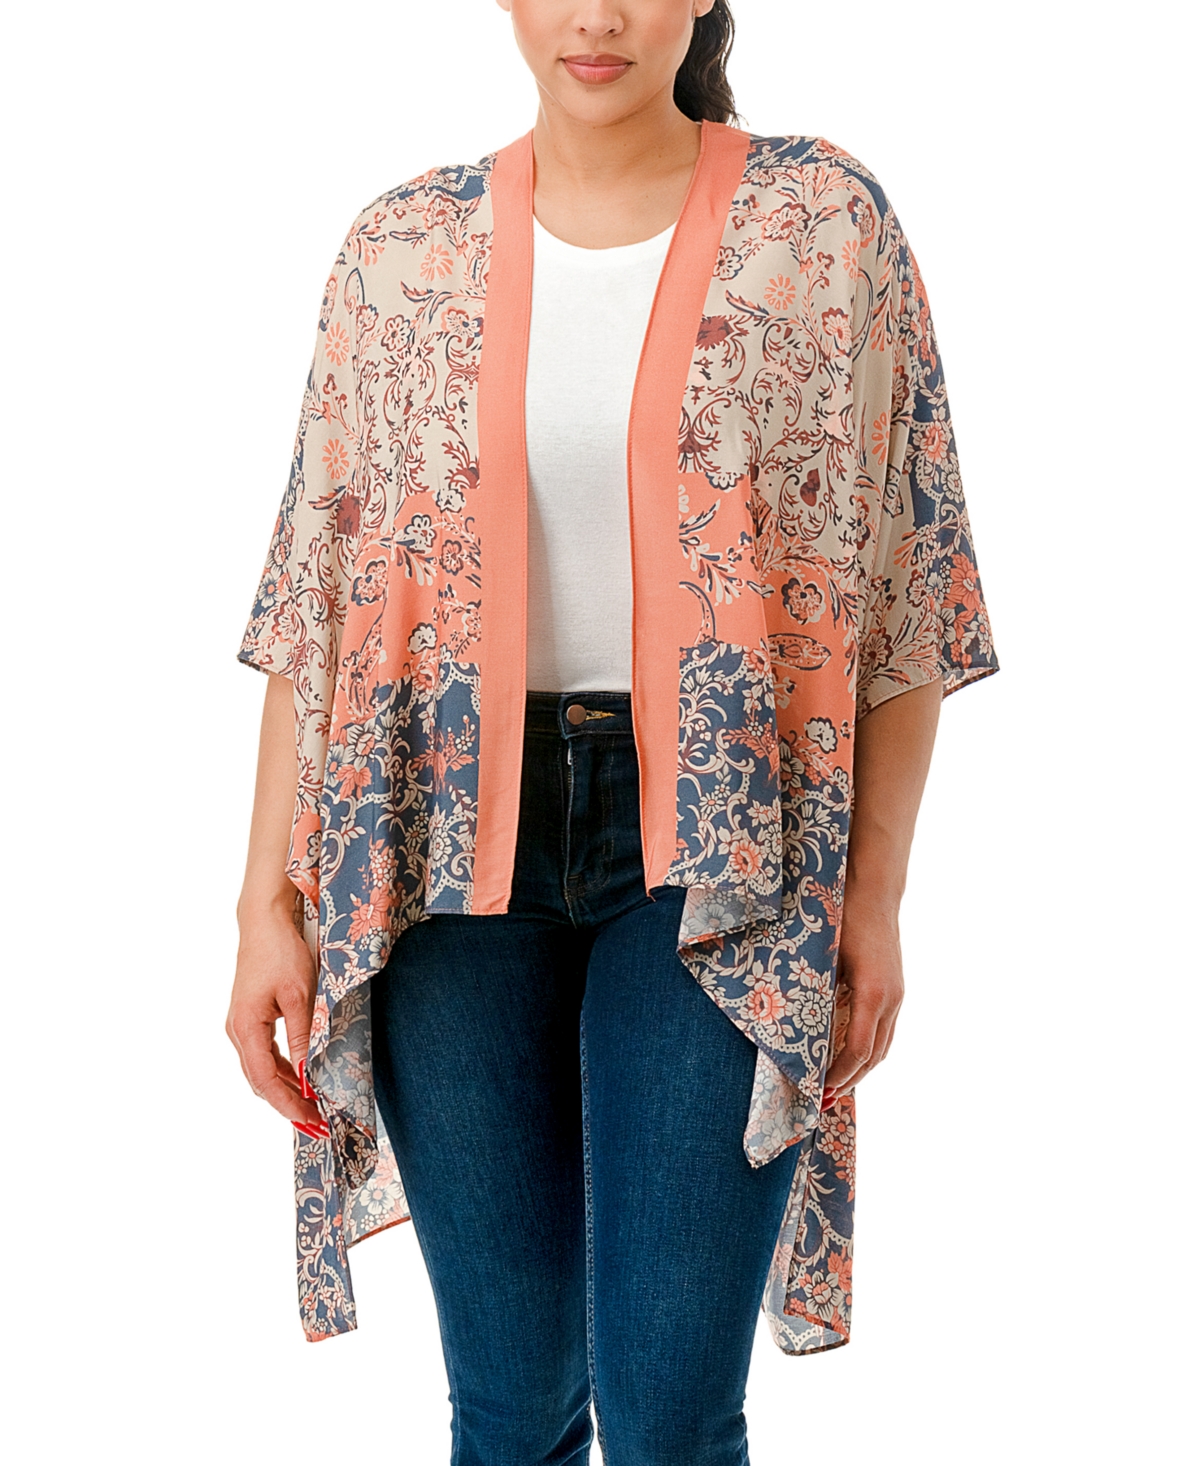 Marcus Adler Ombre Floral Kimono Cover-up In Pink